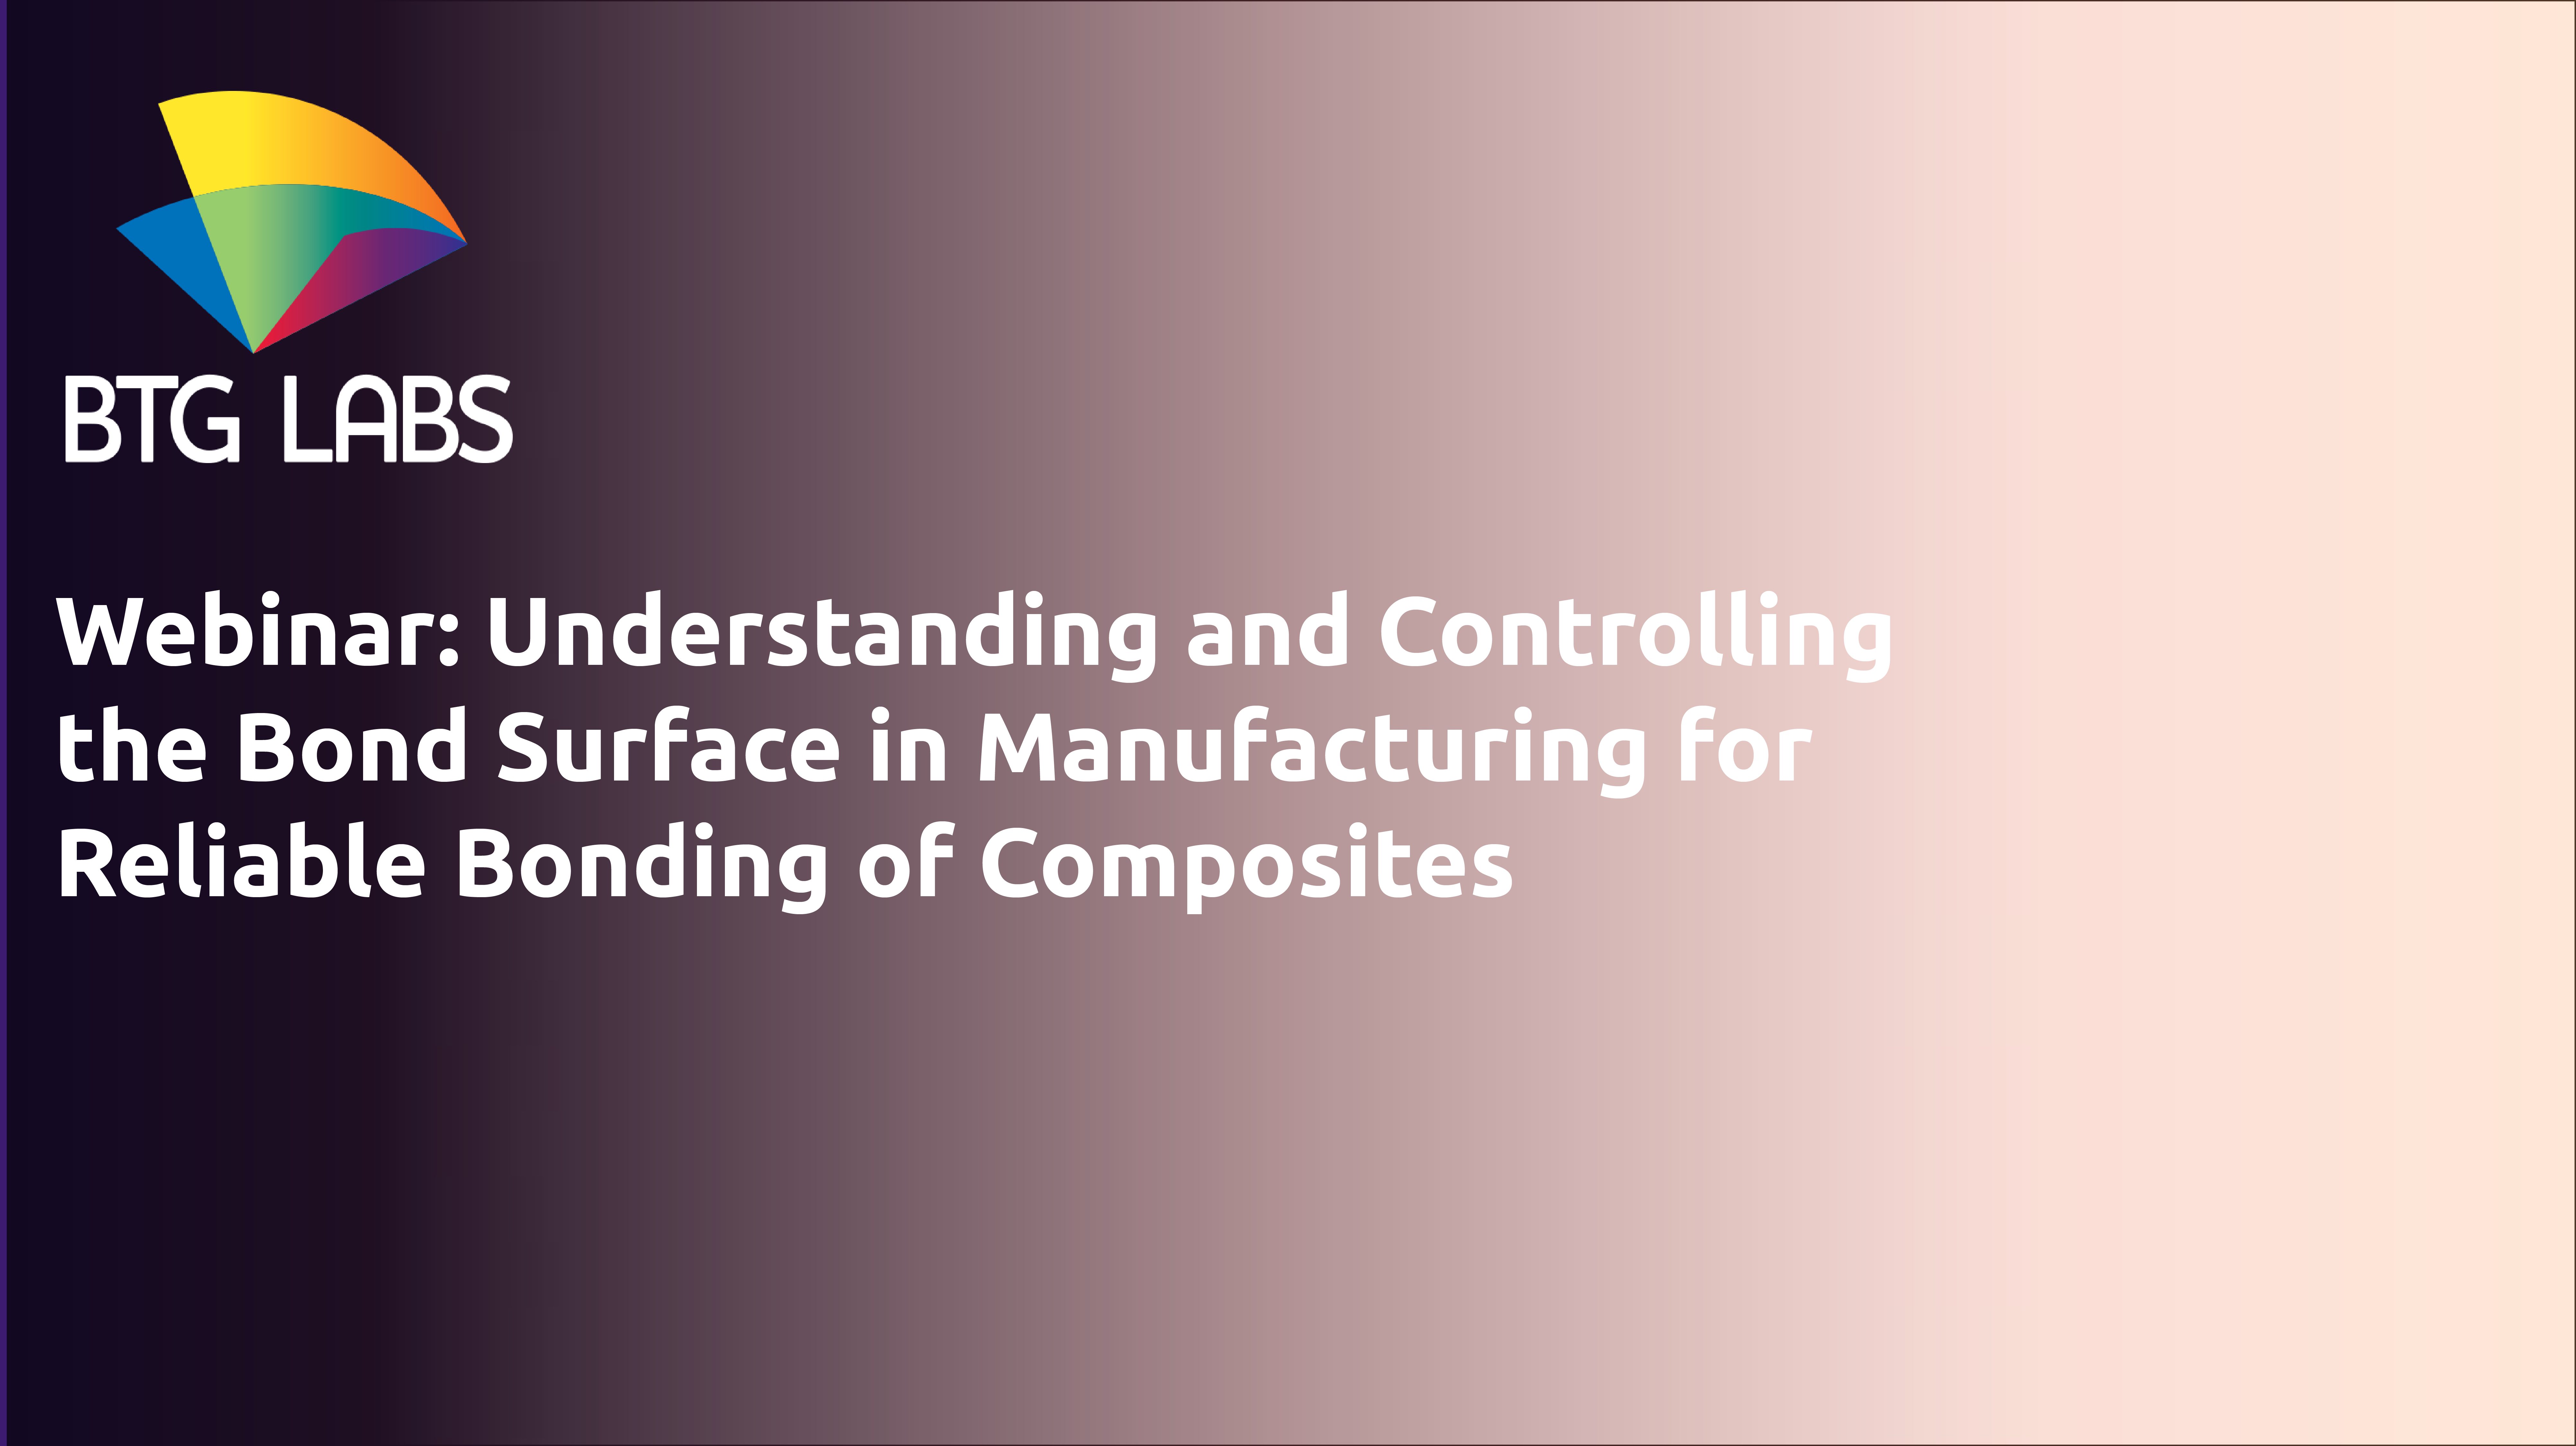 BTG Labs Hosting Another Webinar with Composites World Magazine